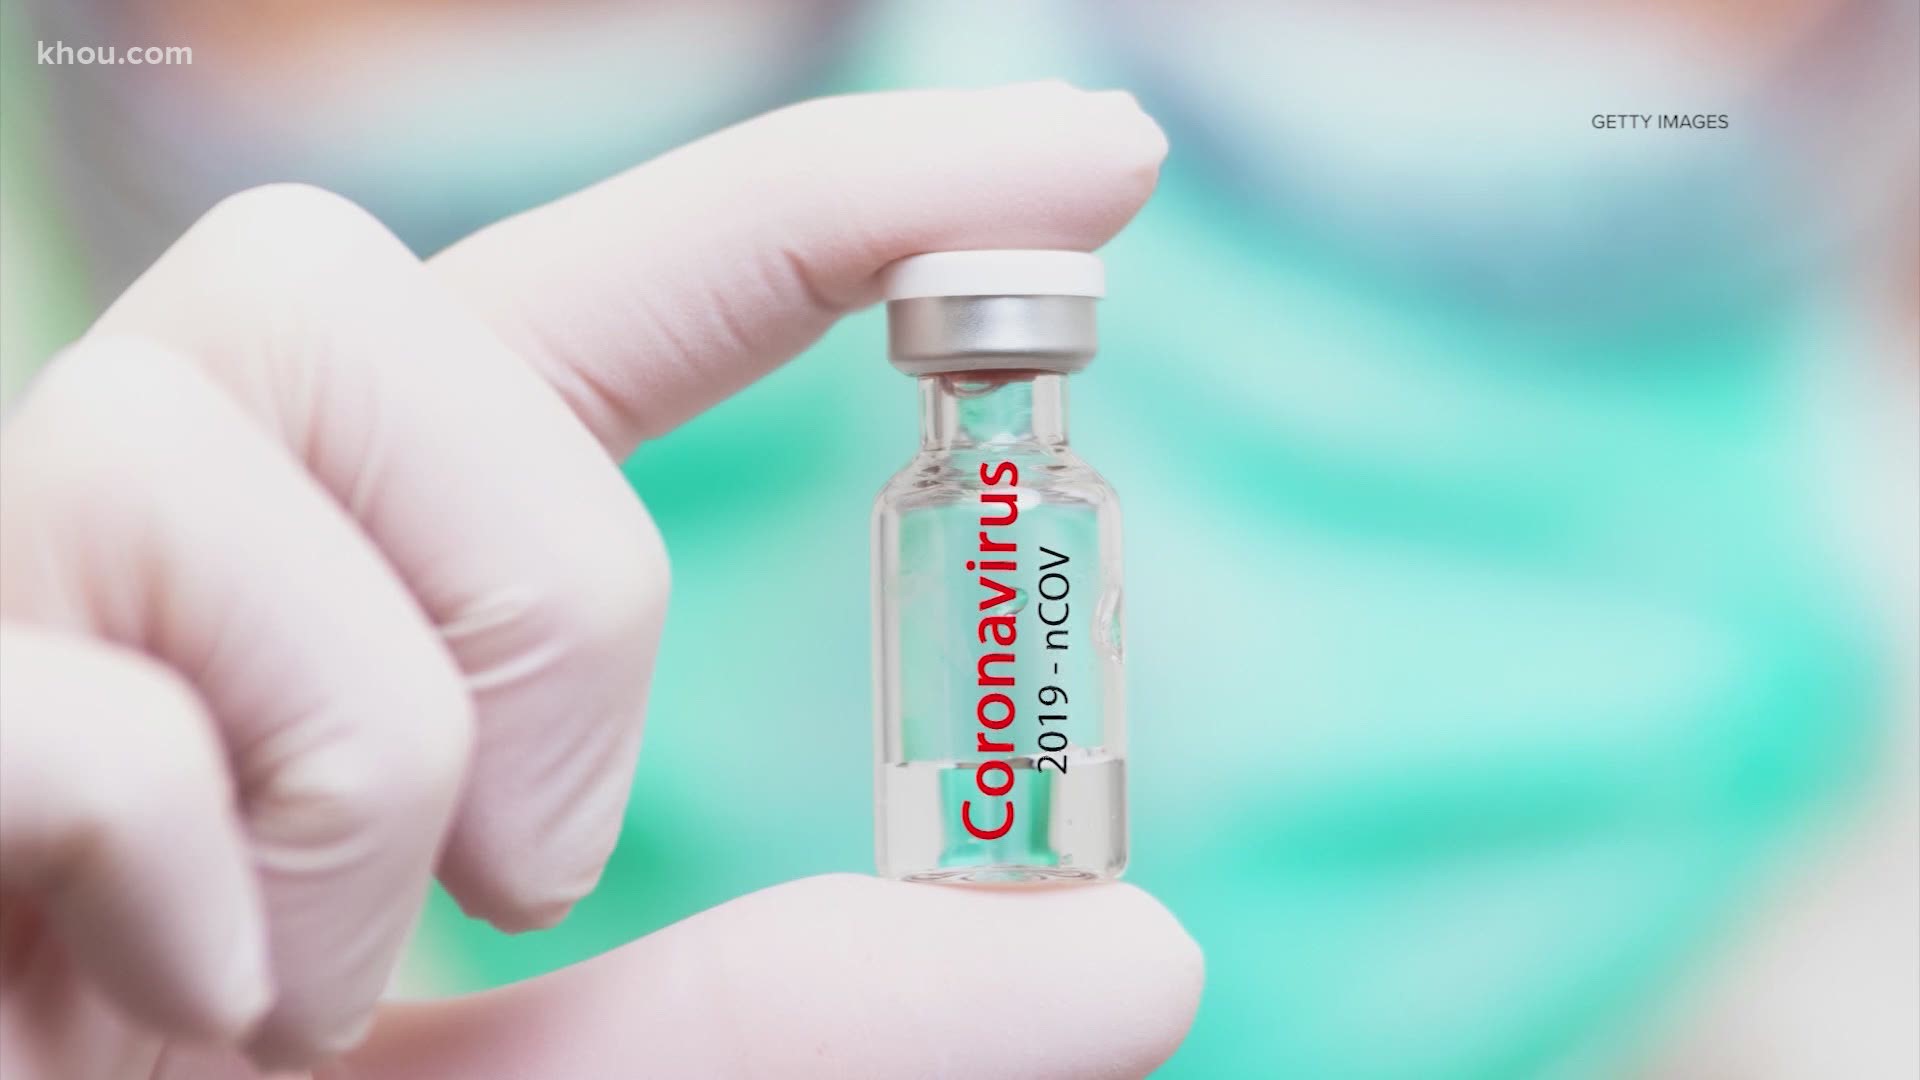 Texas Department of State Health Services said bout 20 sites across Texas will be the first to vaccinate people when Pfizer's COVID-19 vaccine is approved.